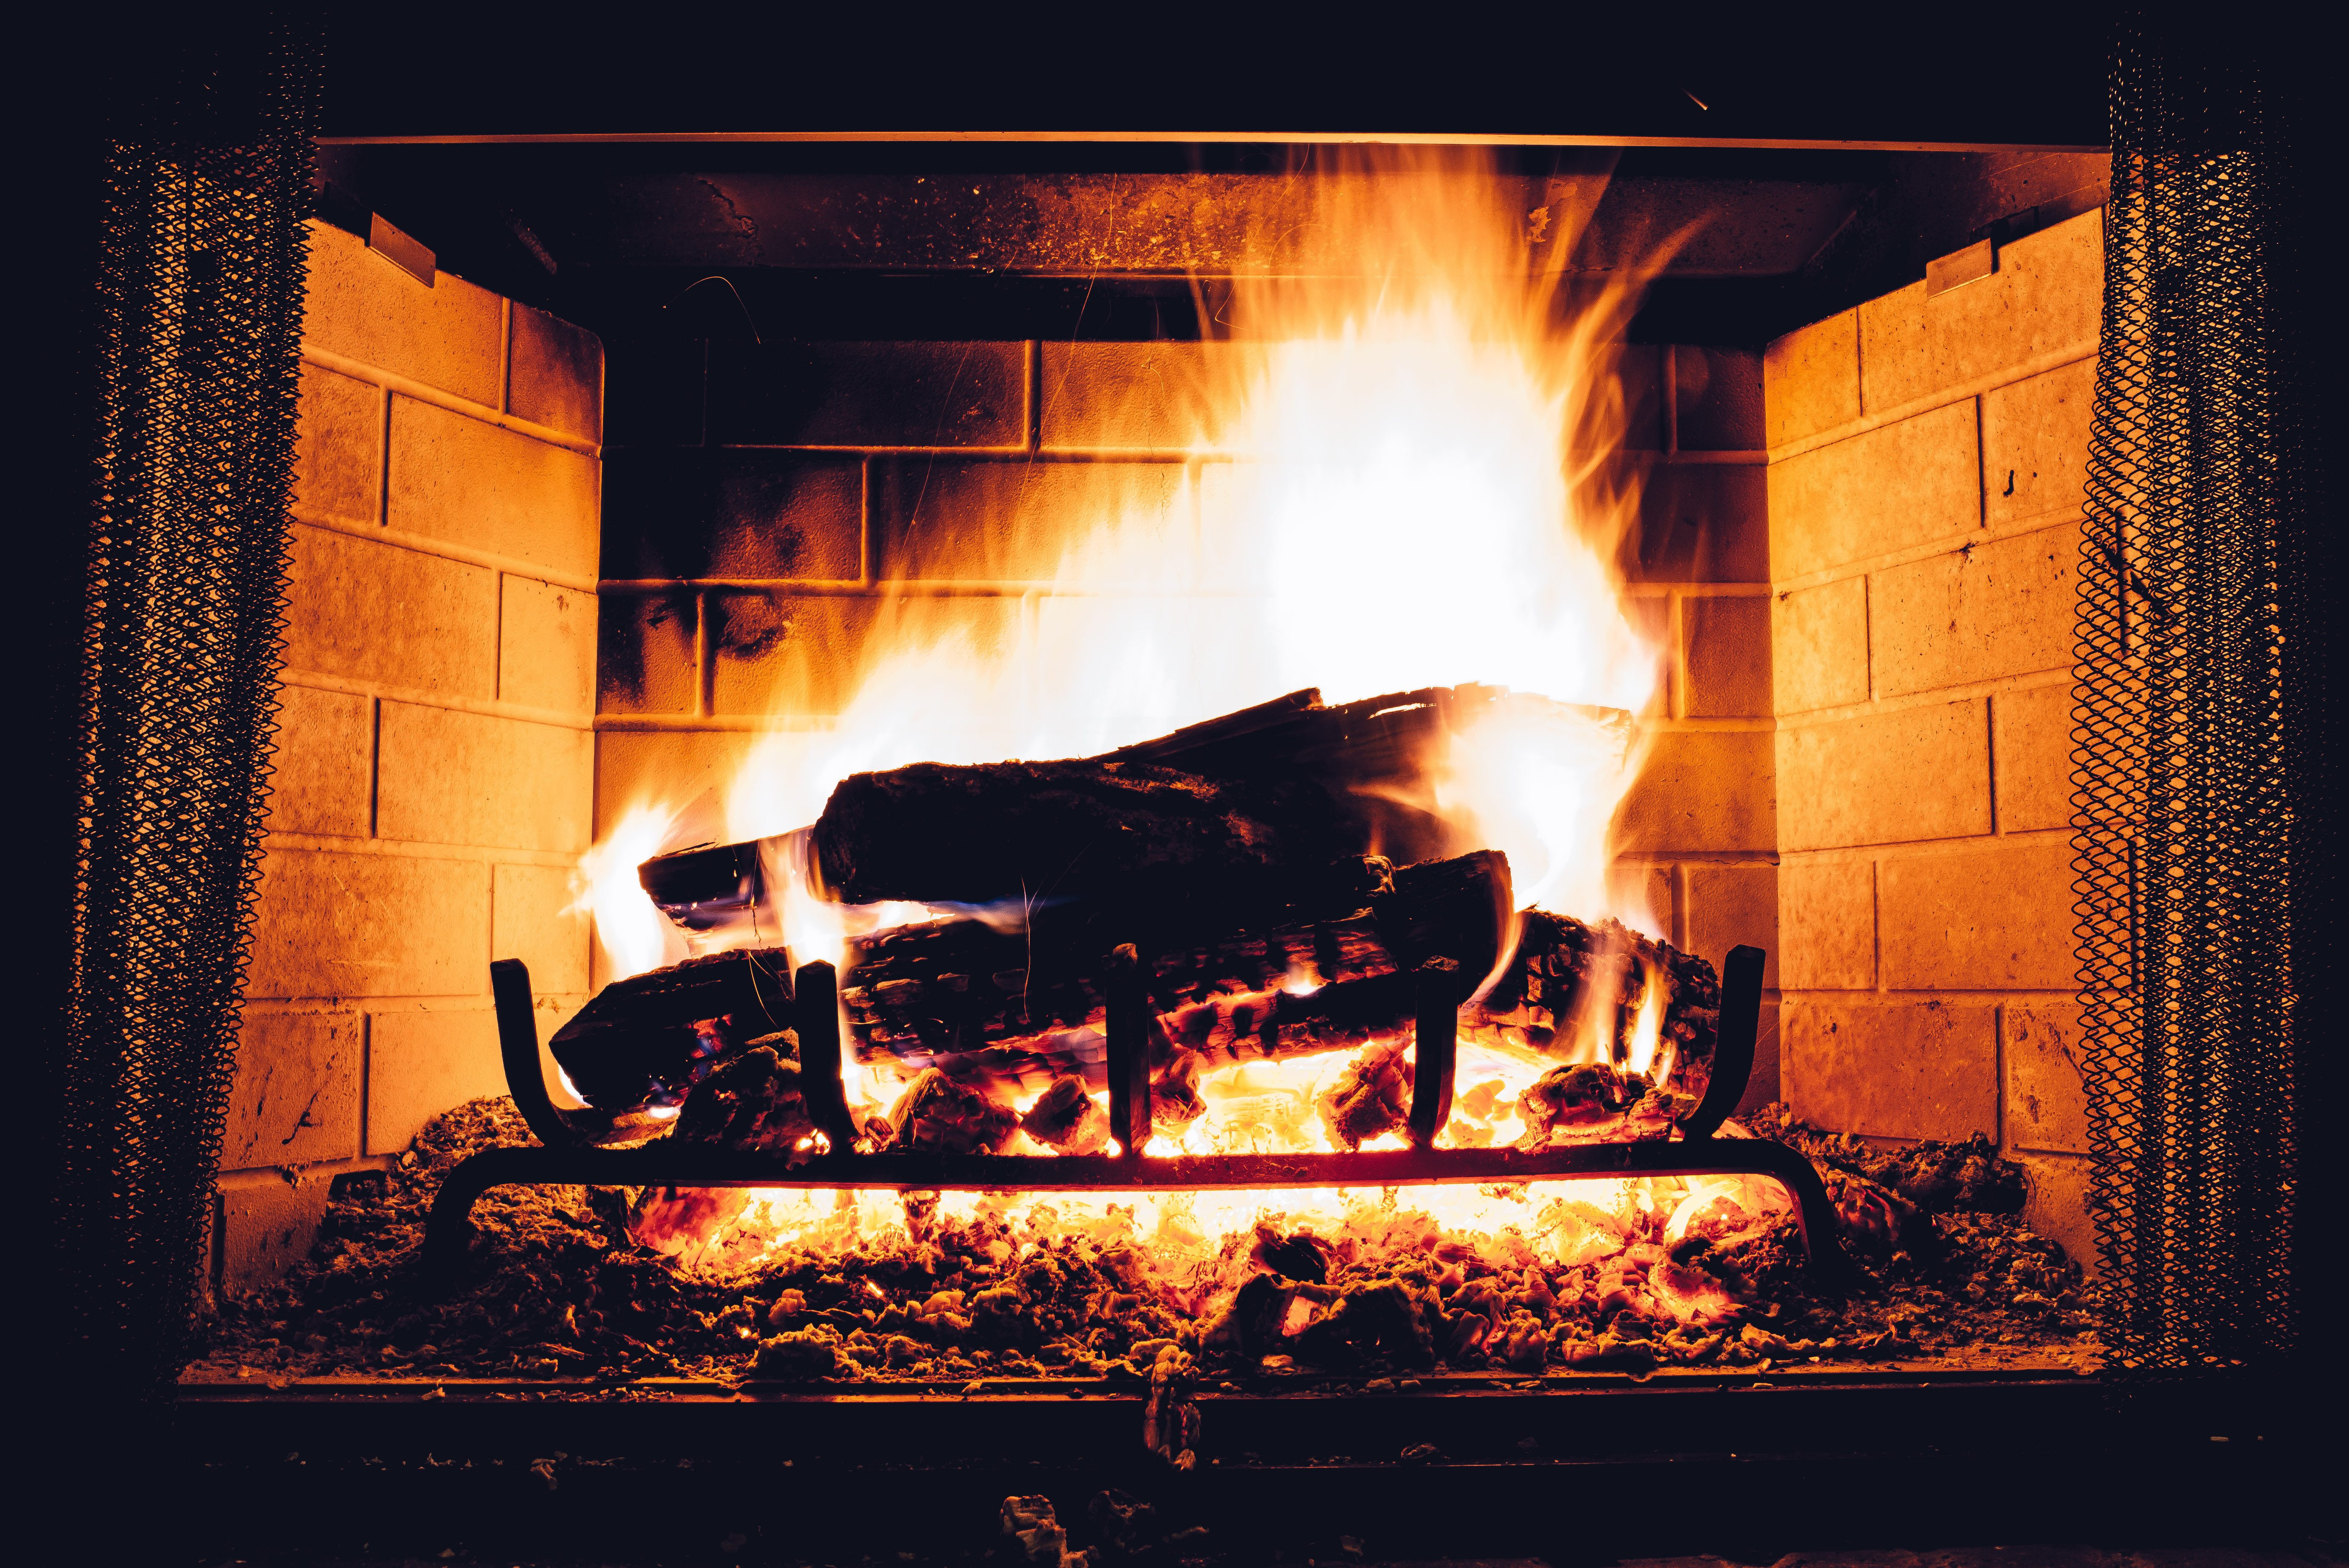 Retailer of Fireplaces & Accessories